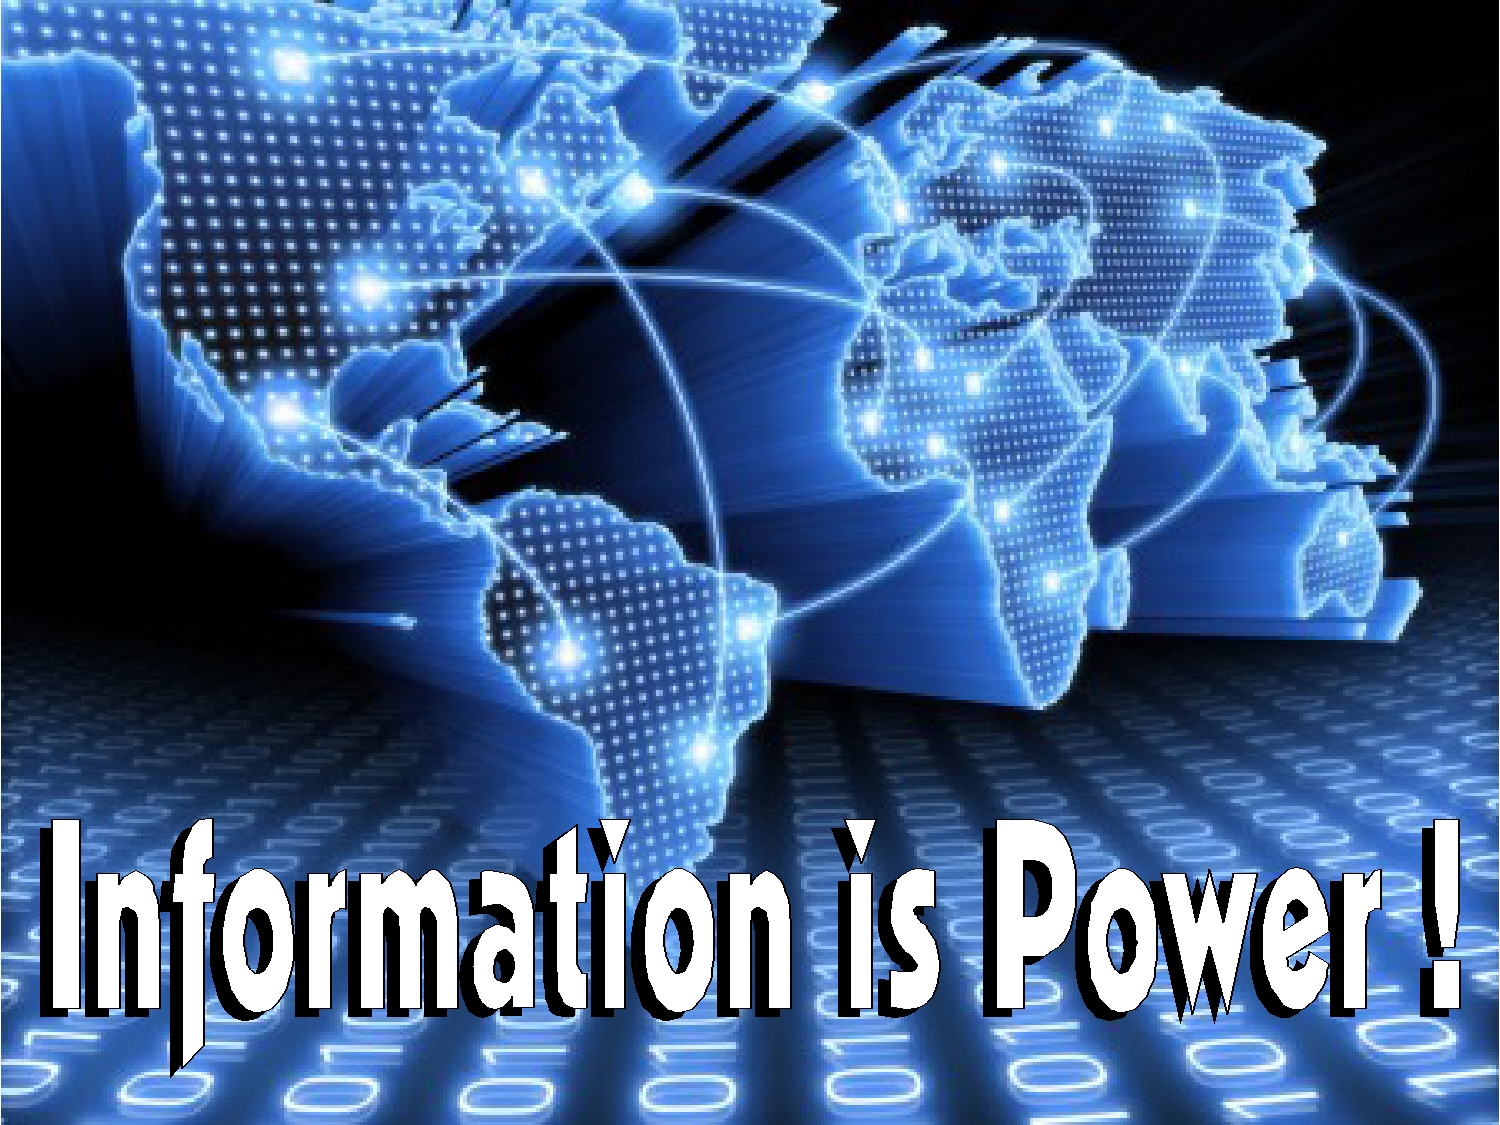 Information is power